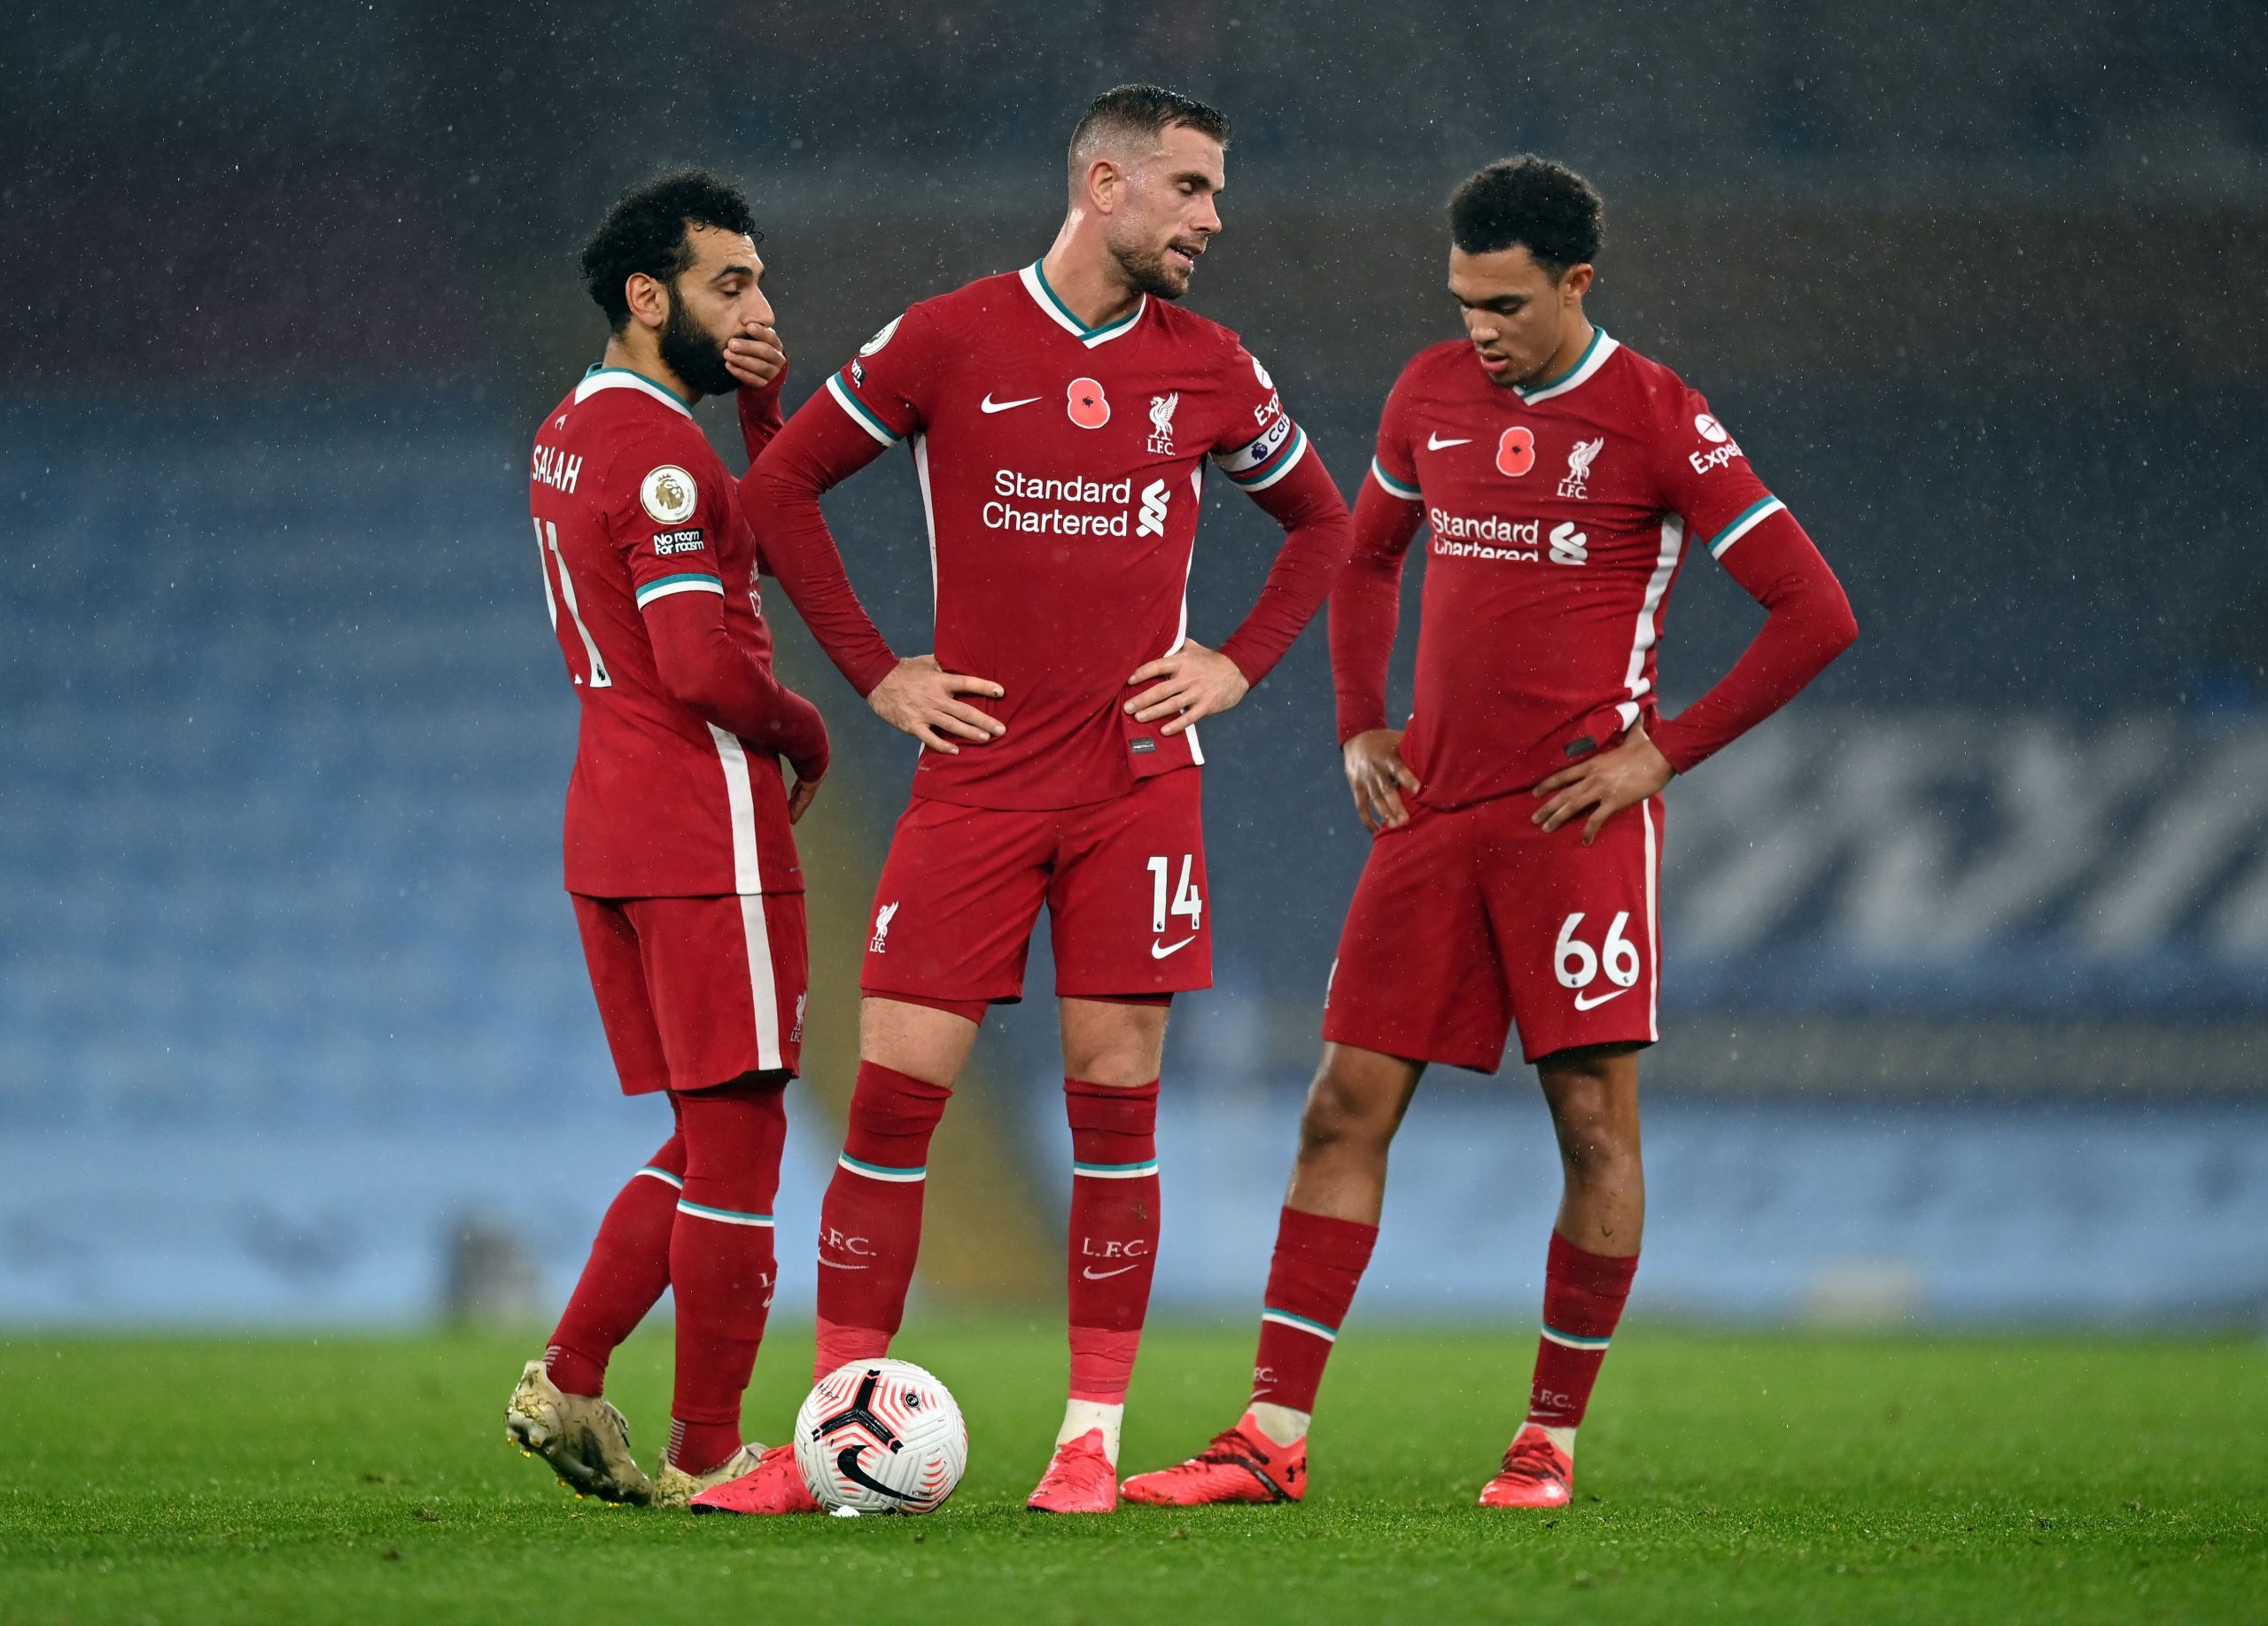 Liverpool's Henderson set to miss several matches due to injury (Henderson is standing in the middle in the photo)